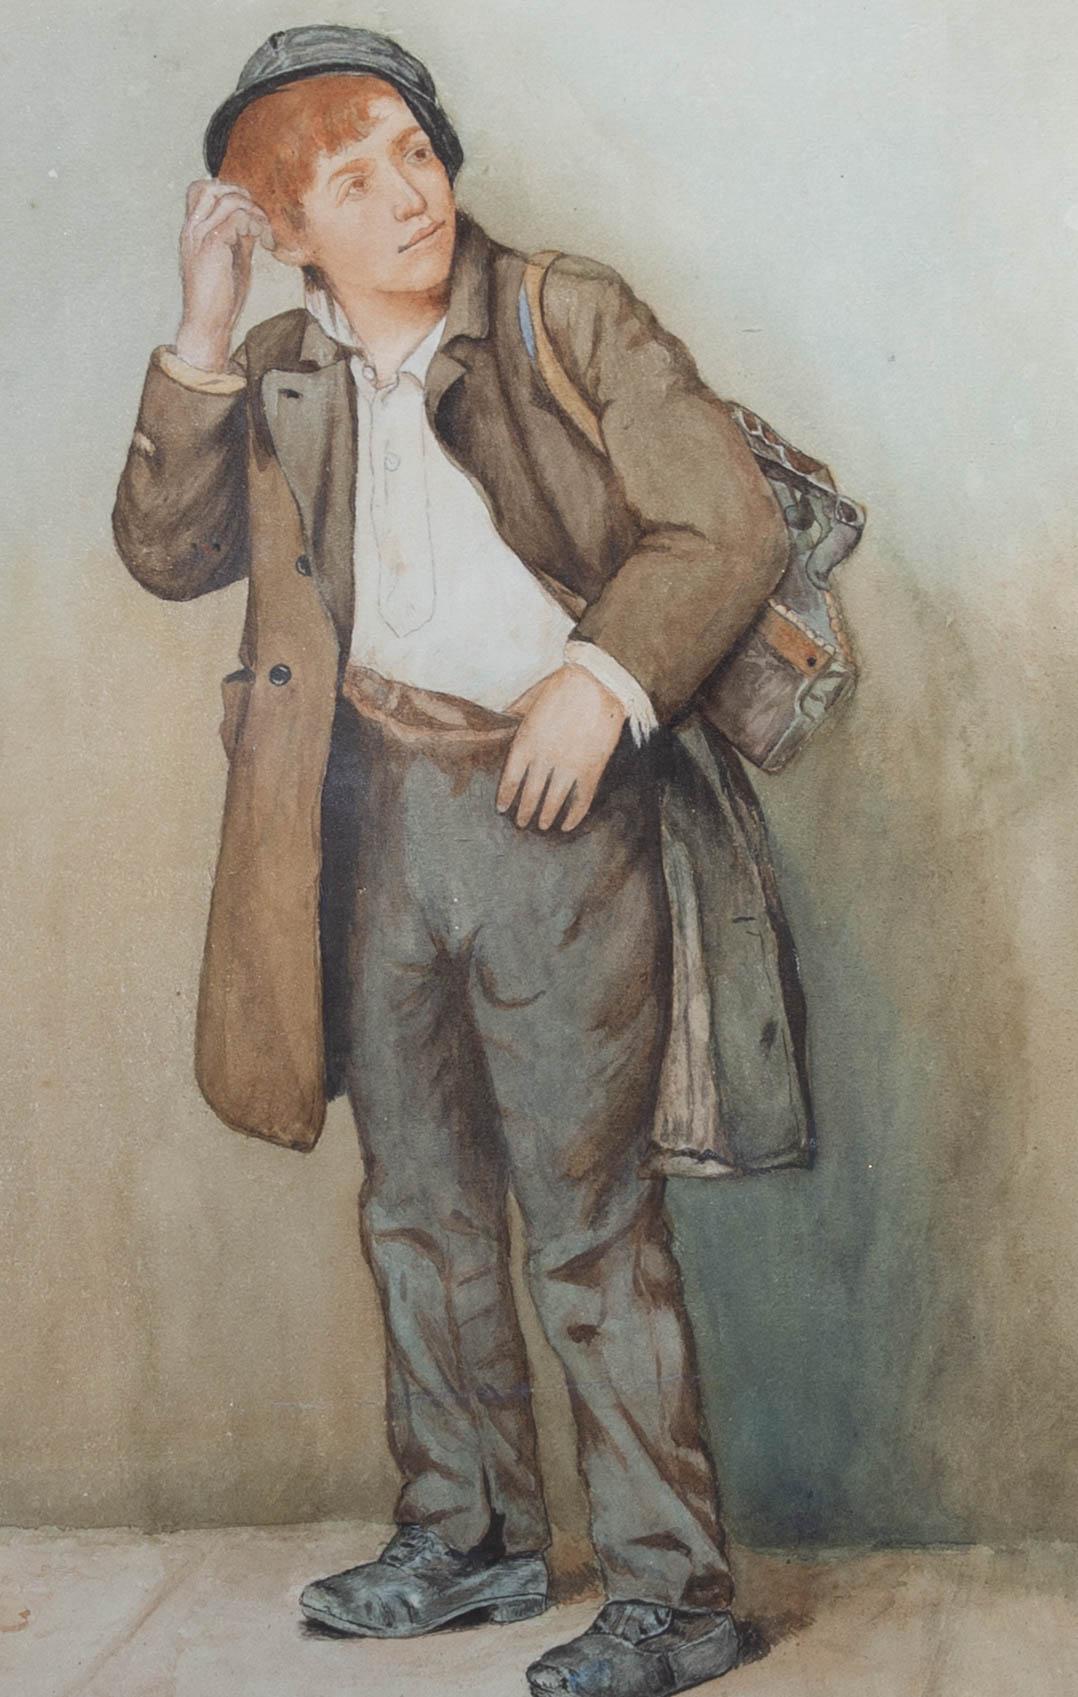 A charming full length watercolour portrait of a young boy, scruffily dressed with crumpled trousers and unlaced shoes. the carries a satchel over his shoulder and scratches his head as the looks playfully over his shoulder. The painting is unsigned